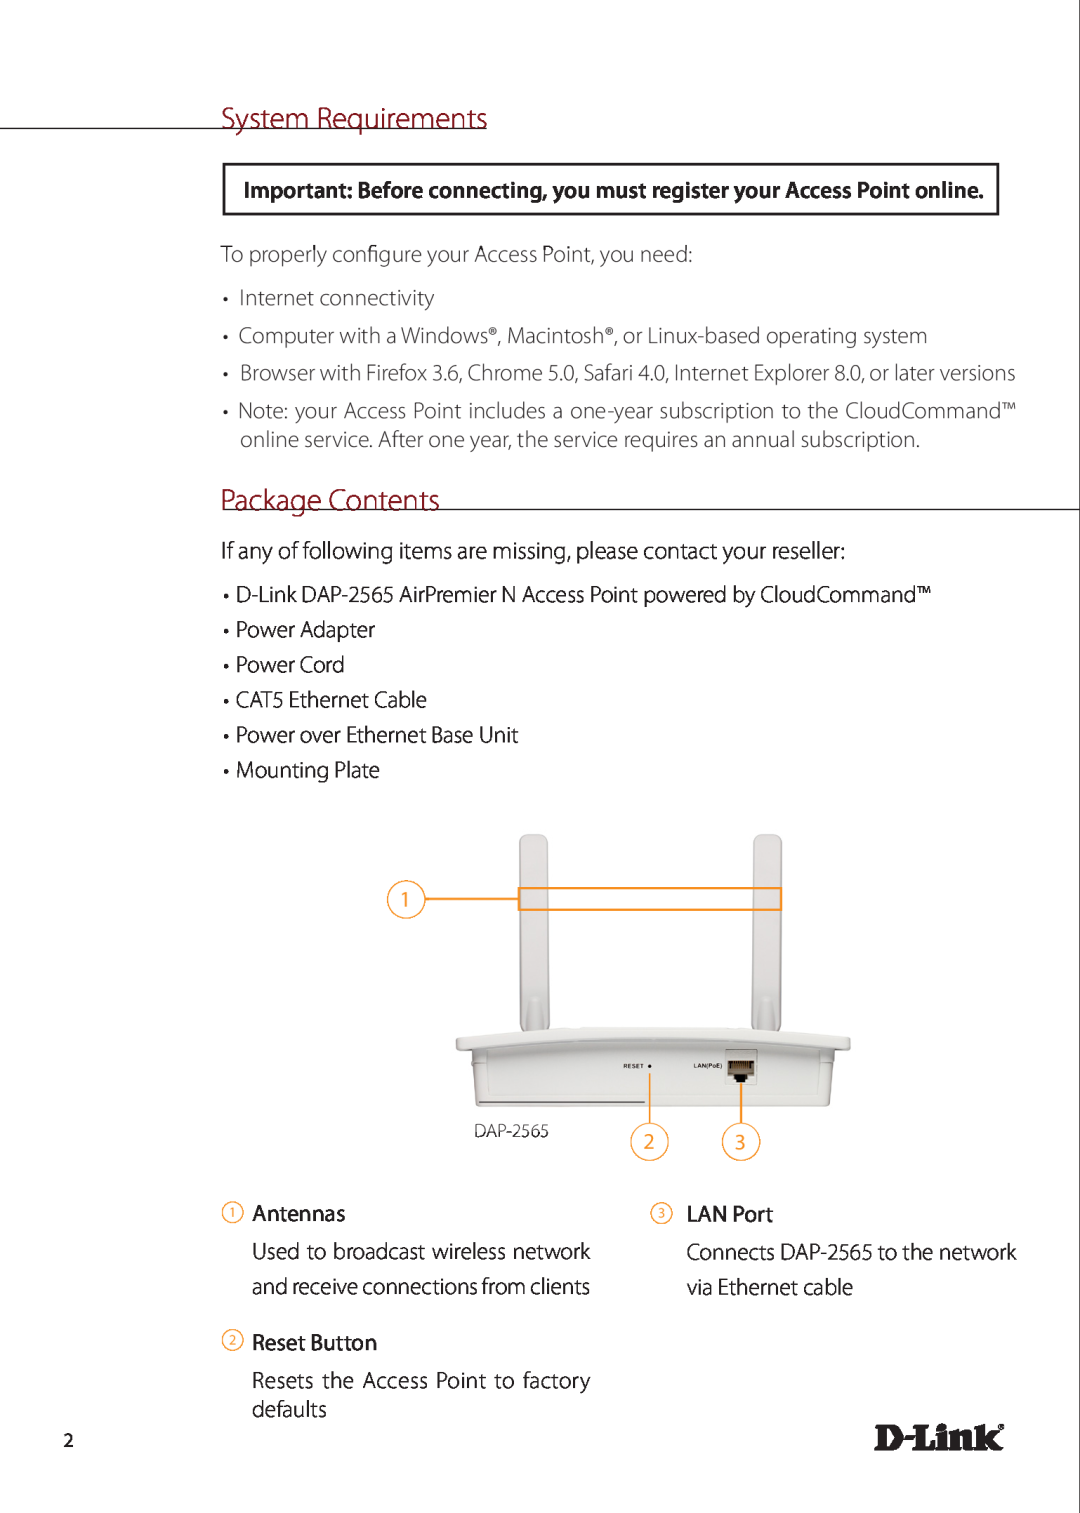 D-Link airpremier n dual band poe access point manual System Requirements, Package Contents 